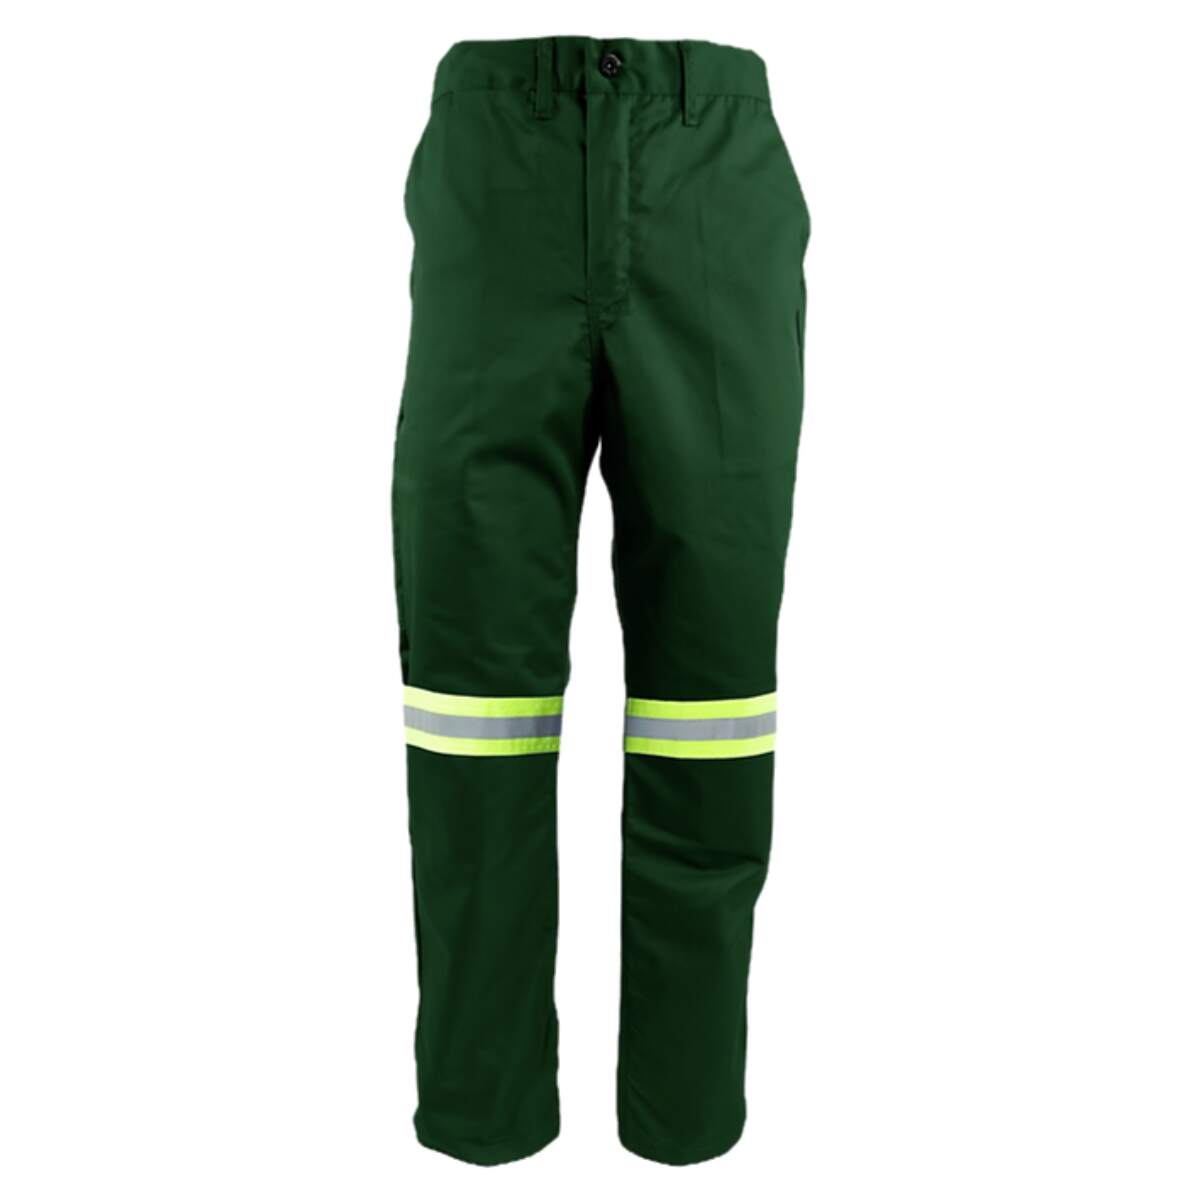 titan-polyviscose-acid-resistant-trousers by safety equipments supplier - landmark congo sarl